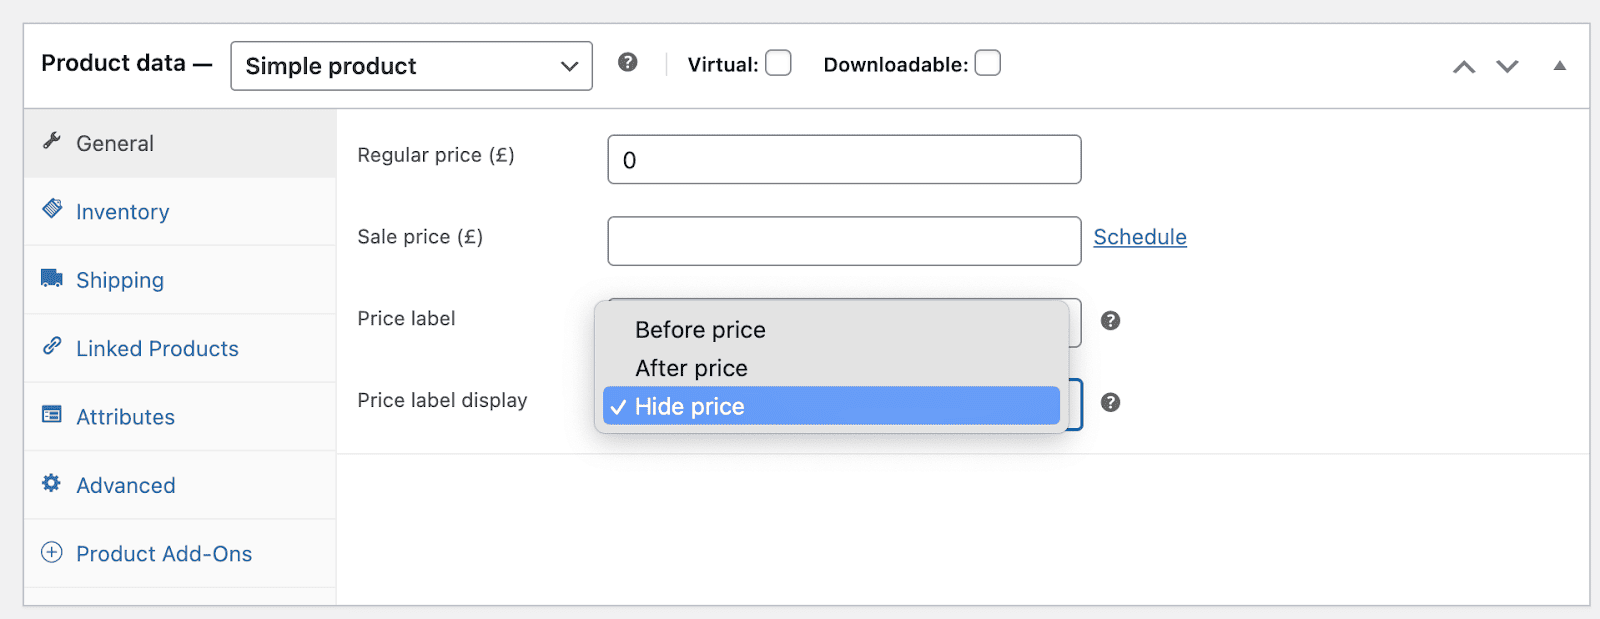 Set the price of the product to $0 and add ‘Hide Price’ as the price label.